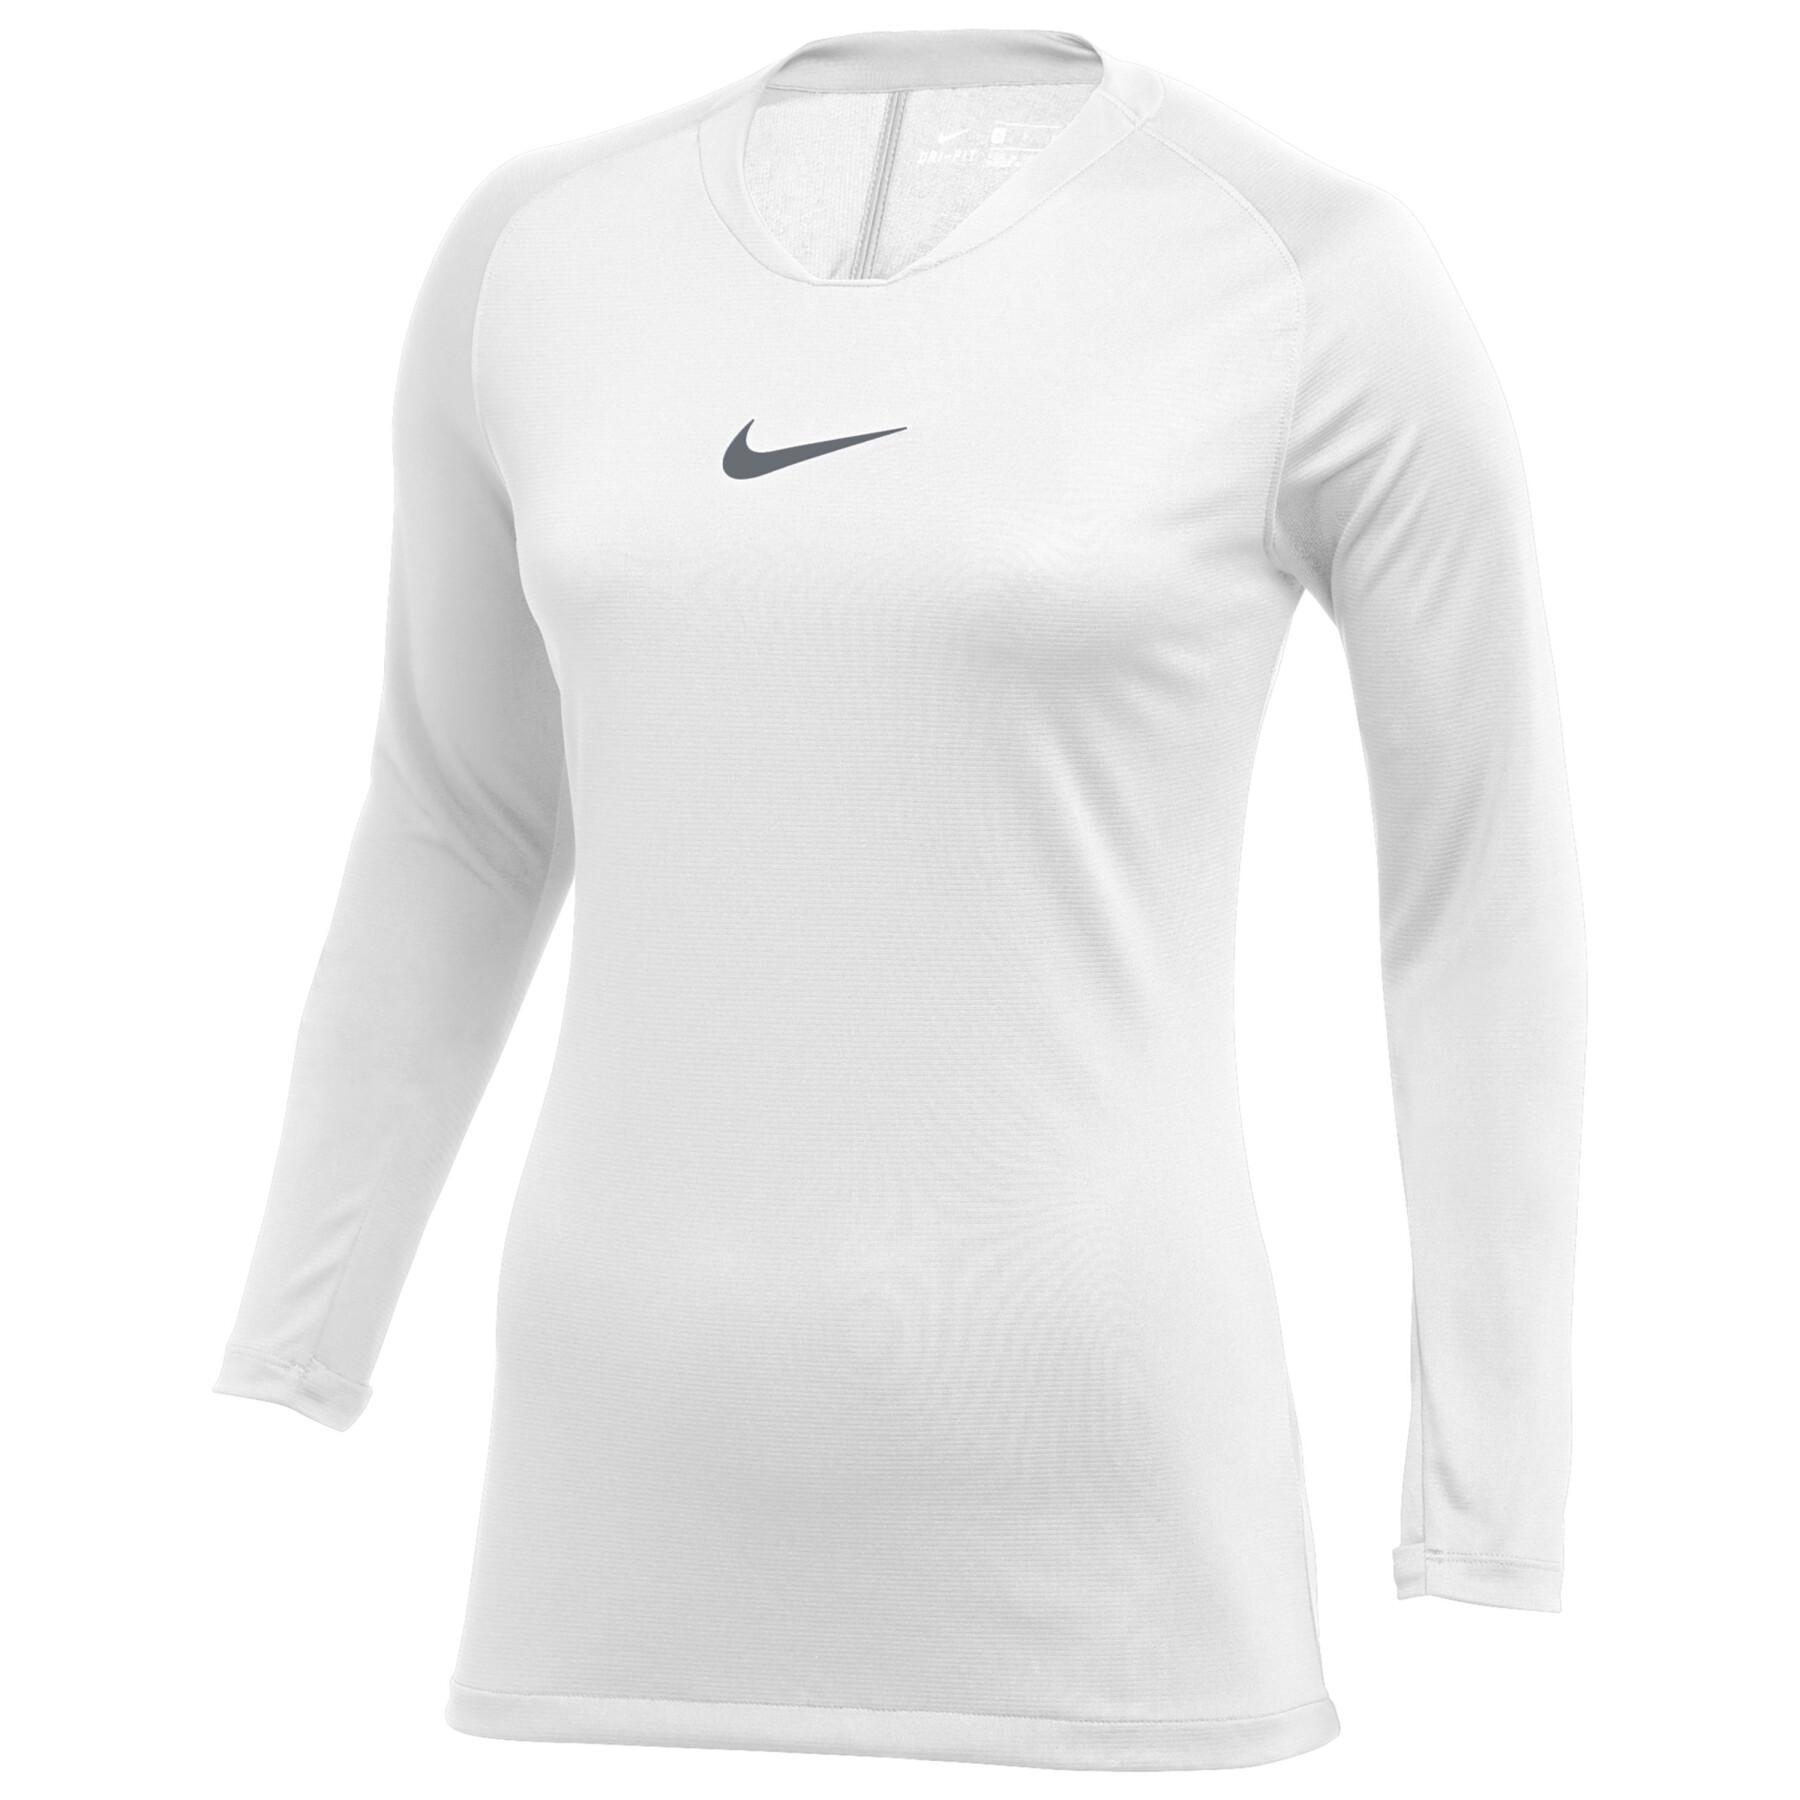 Women's jersey Nike Dri-FIT Park First Layer